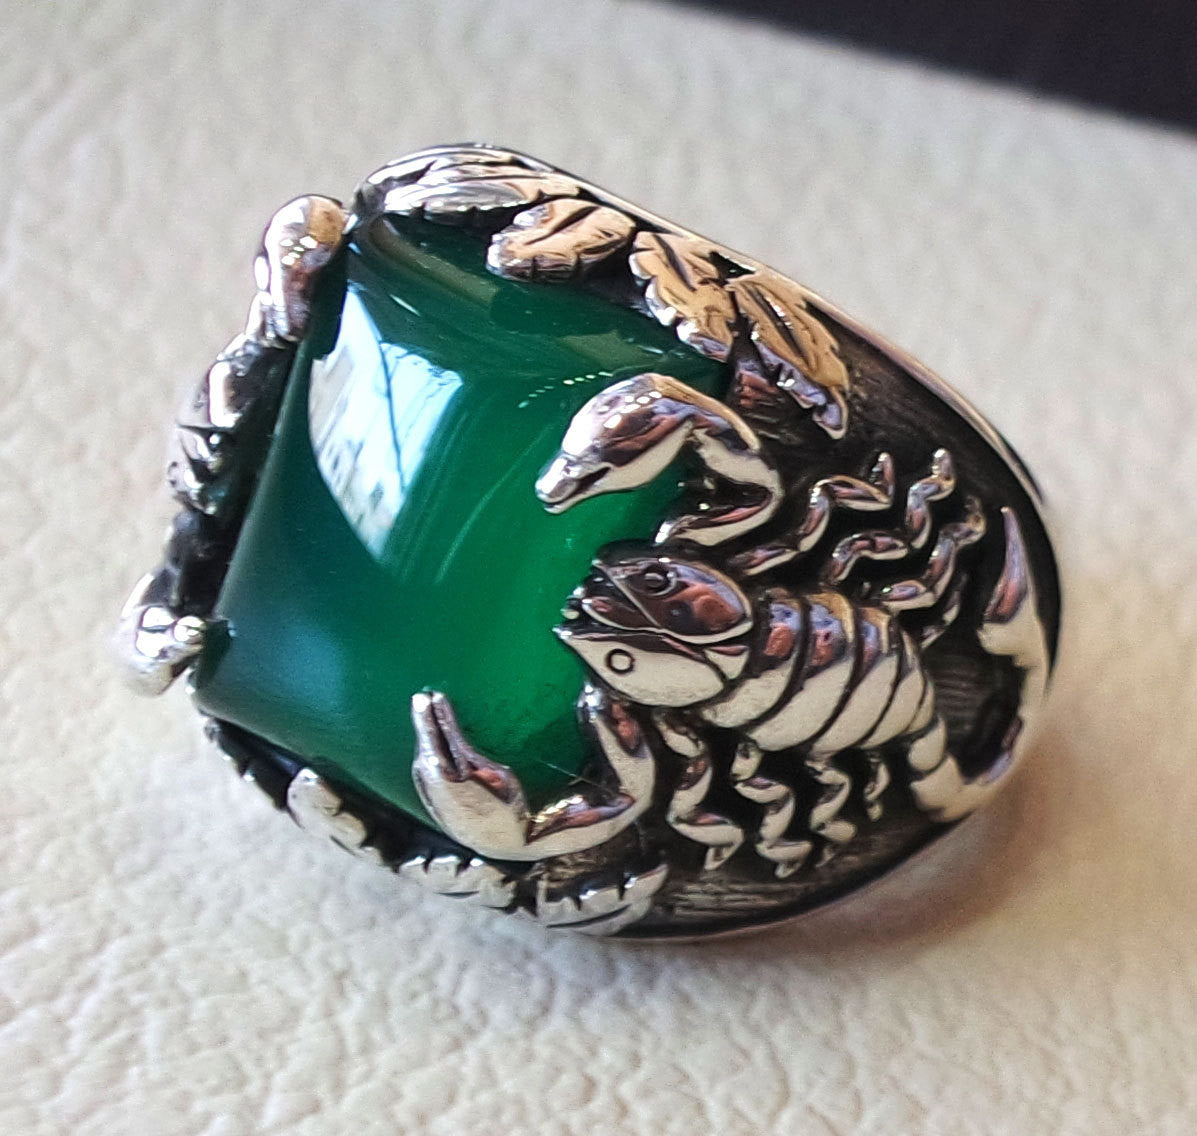 huge scorpion sterling silver 925 huge ring any size rectangular green aqeeq agate middle eastern vintage handmade jewelry fast shipping